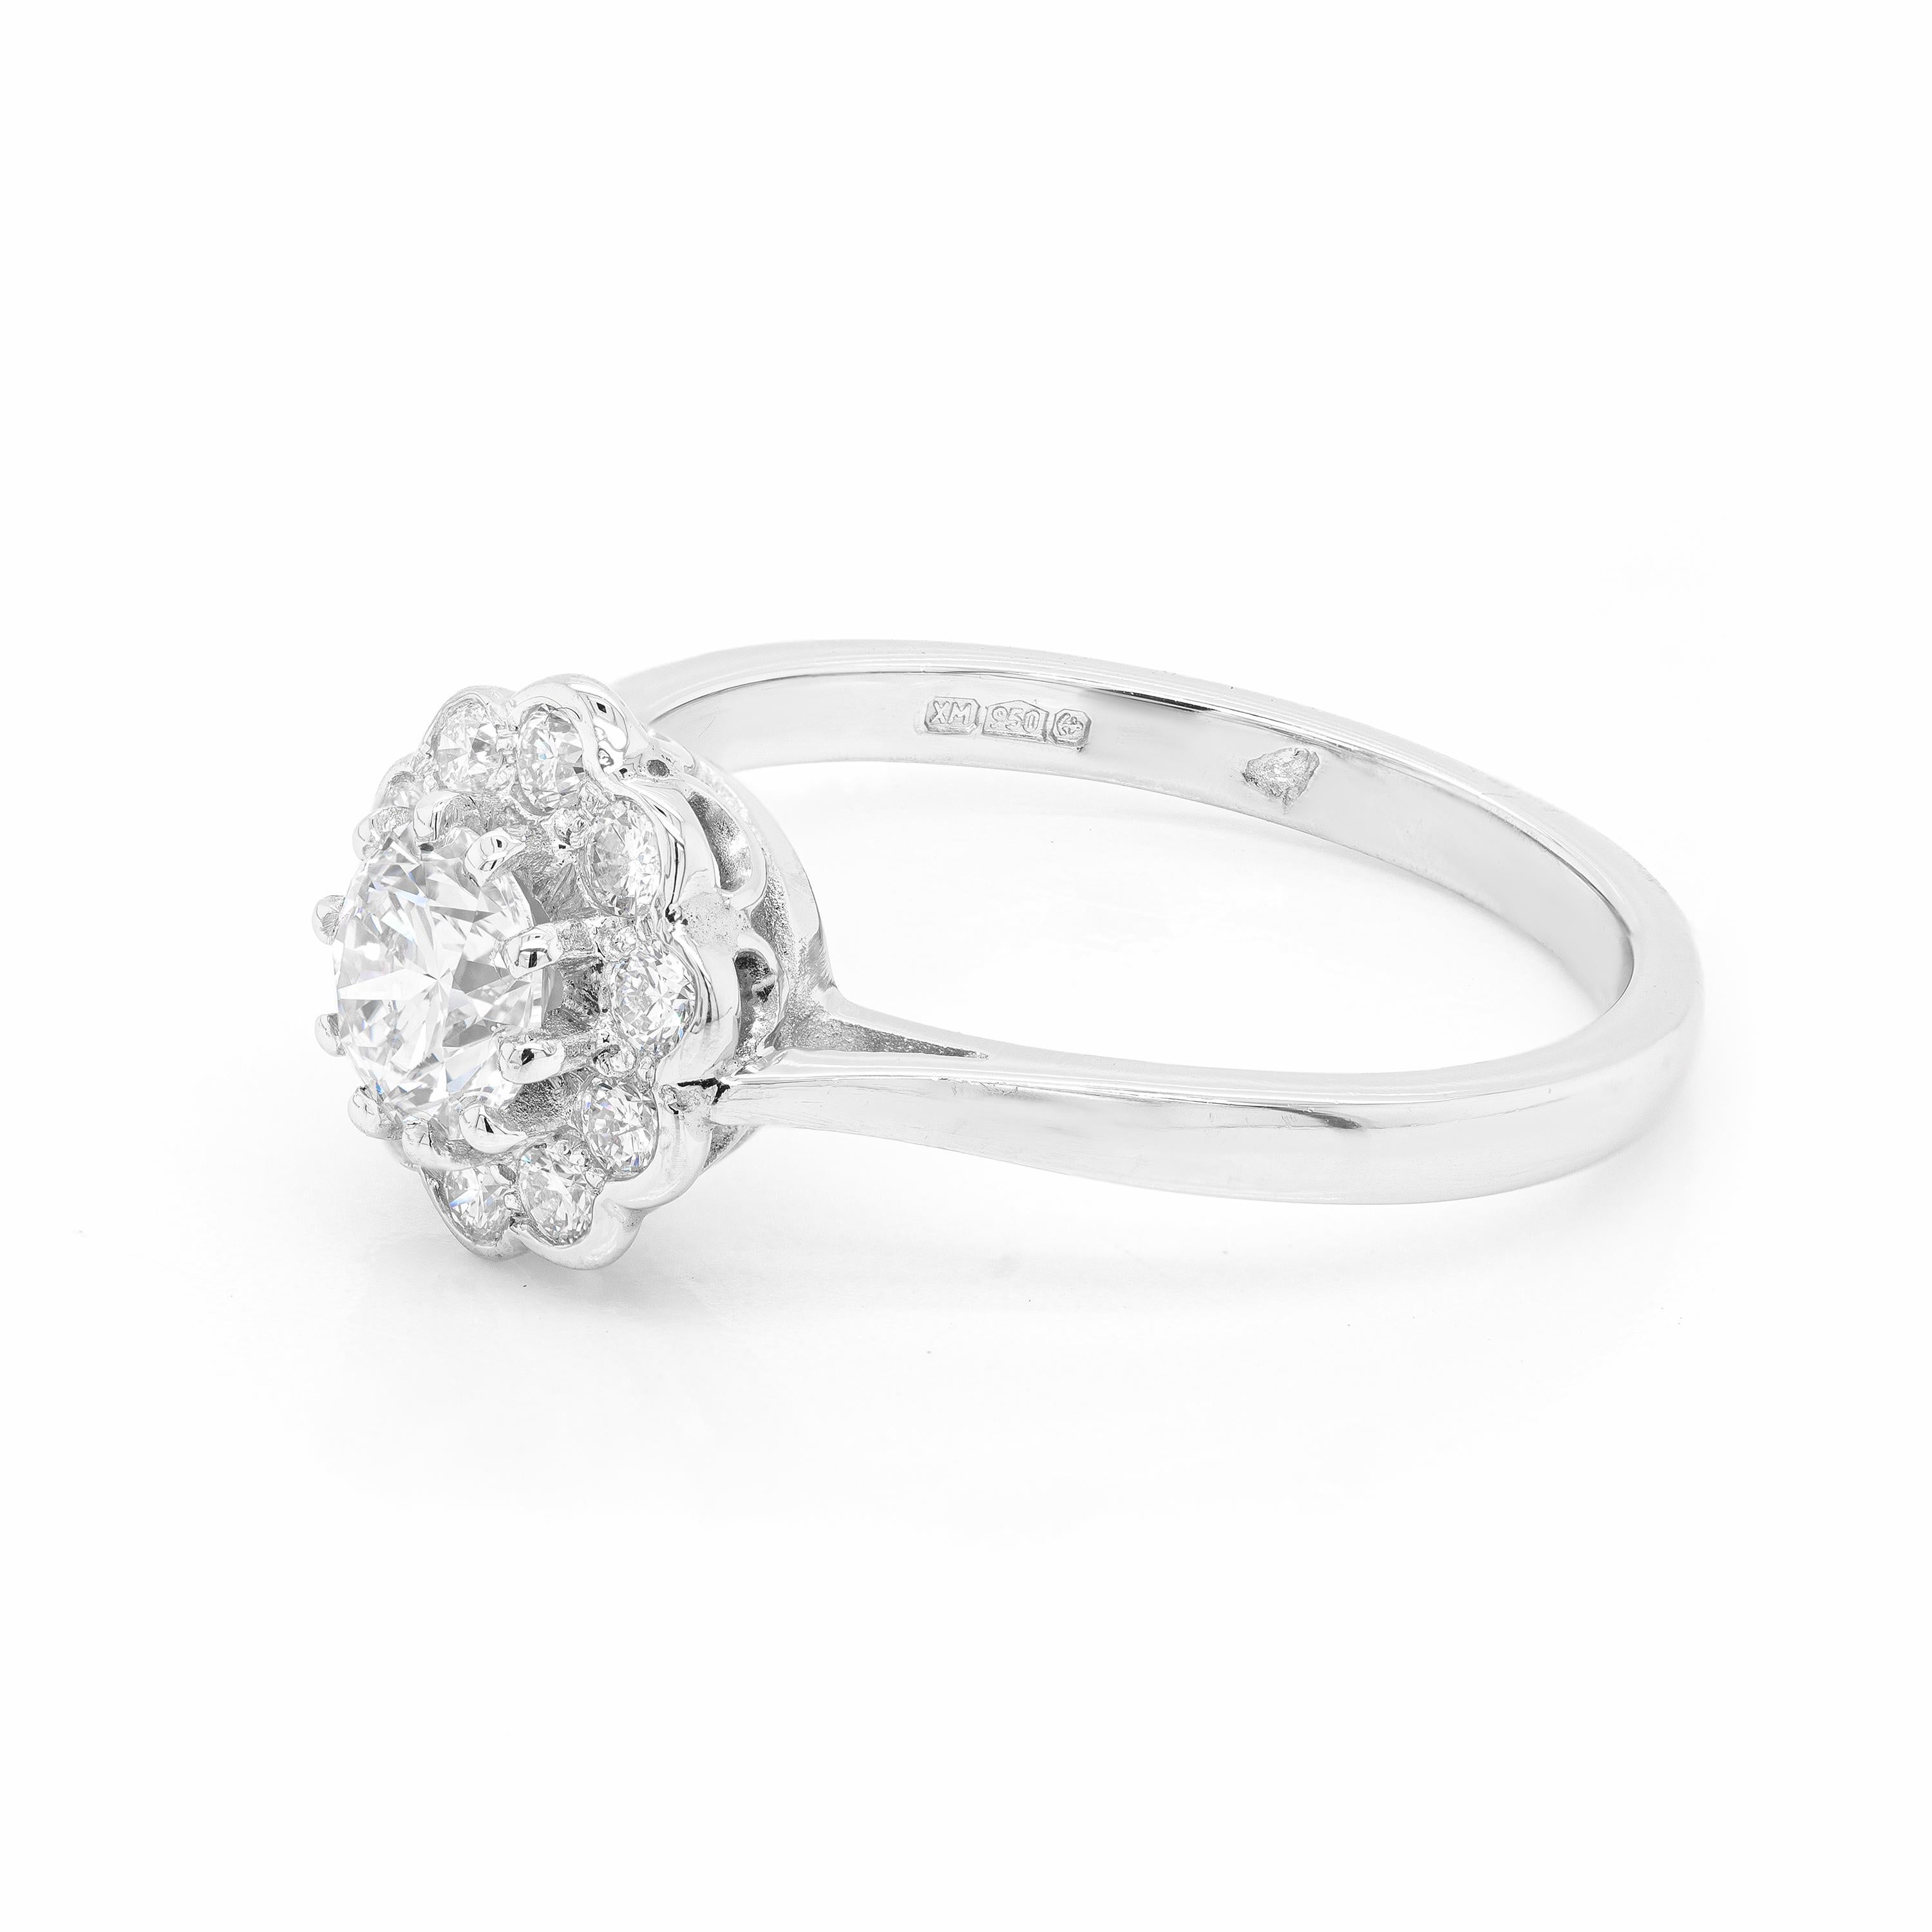 This lovely coronet cluster ring is beautifully centred with a 0.53ct round brilliant cut diamond, certified F in colour and VS2 in clarity, mounted in a ten claw, open back setting. The beautiful stone is surrounded by 10 smaller round brilliant